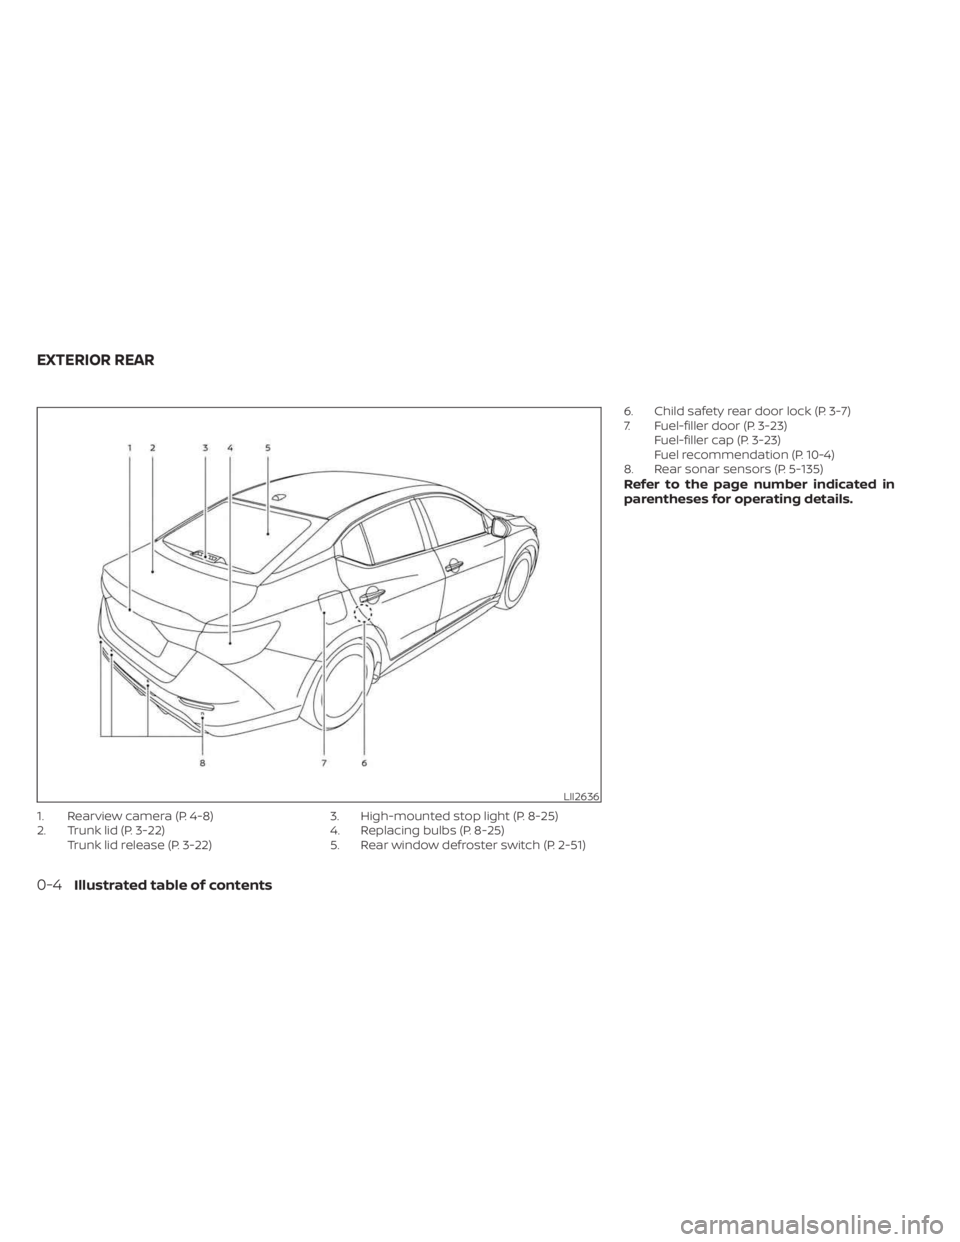 NISSAN SENTRA 2023  Owners Manual 1. Rearview camera (P. 4-8)
2. Trunk lid (P. 3-22)Trunk lid release (P. 3-22) 3. High-mounted stop light (P. 8-25)
4. Replacing bulbs (P. 8-25)
5. Rear window defroster switch (P. 2-51) 6. Child safet